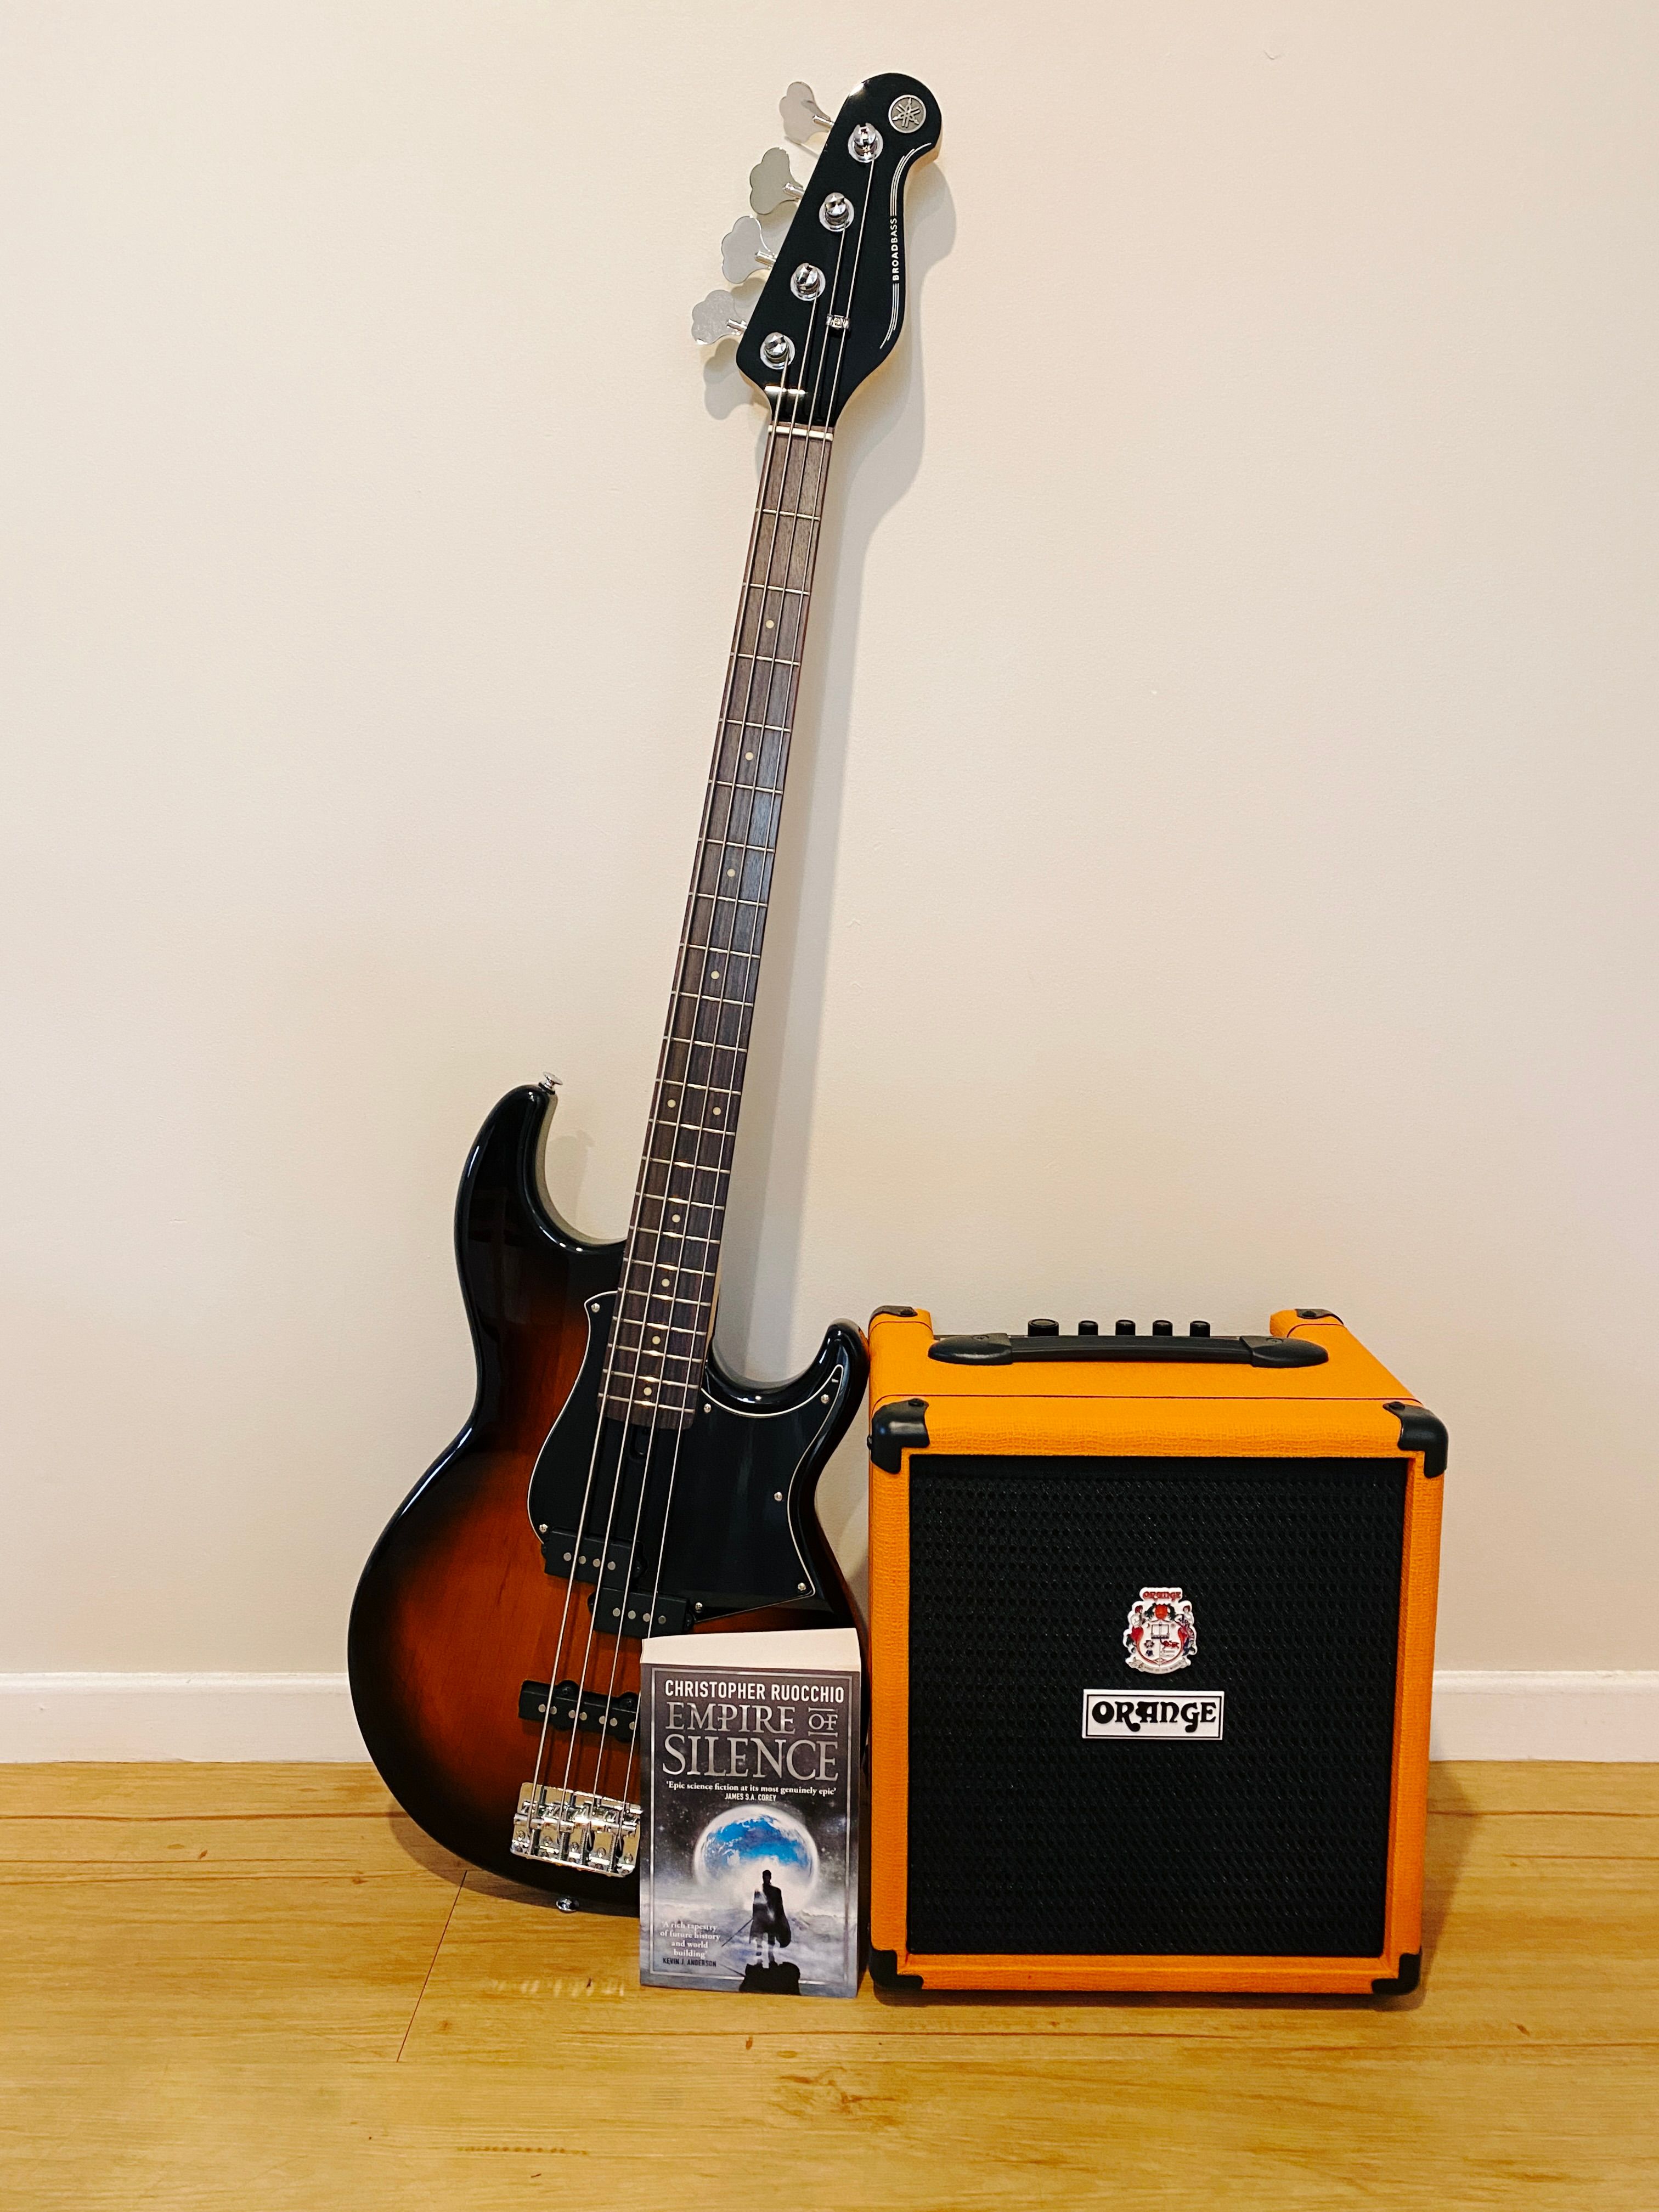 A photo of a small bass guitar amp with a bass guitar leaning against it, and a novel sitting in front. The amp is an Orange Crush Bass 25 and has a black mesh on the front with the rest of it being the customary bright orange colour. The guitar is a Yamaha BB434 and the body fades from black around the edges into a dark rich orange/red wood in the middle. The book is a sci-fi novel "Empire of Silence" by Christopher Ruocchio.